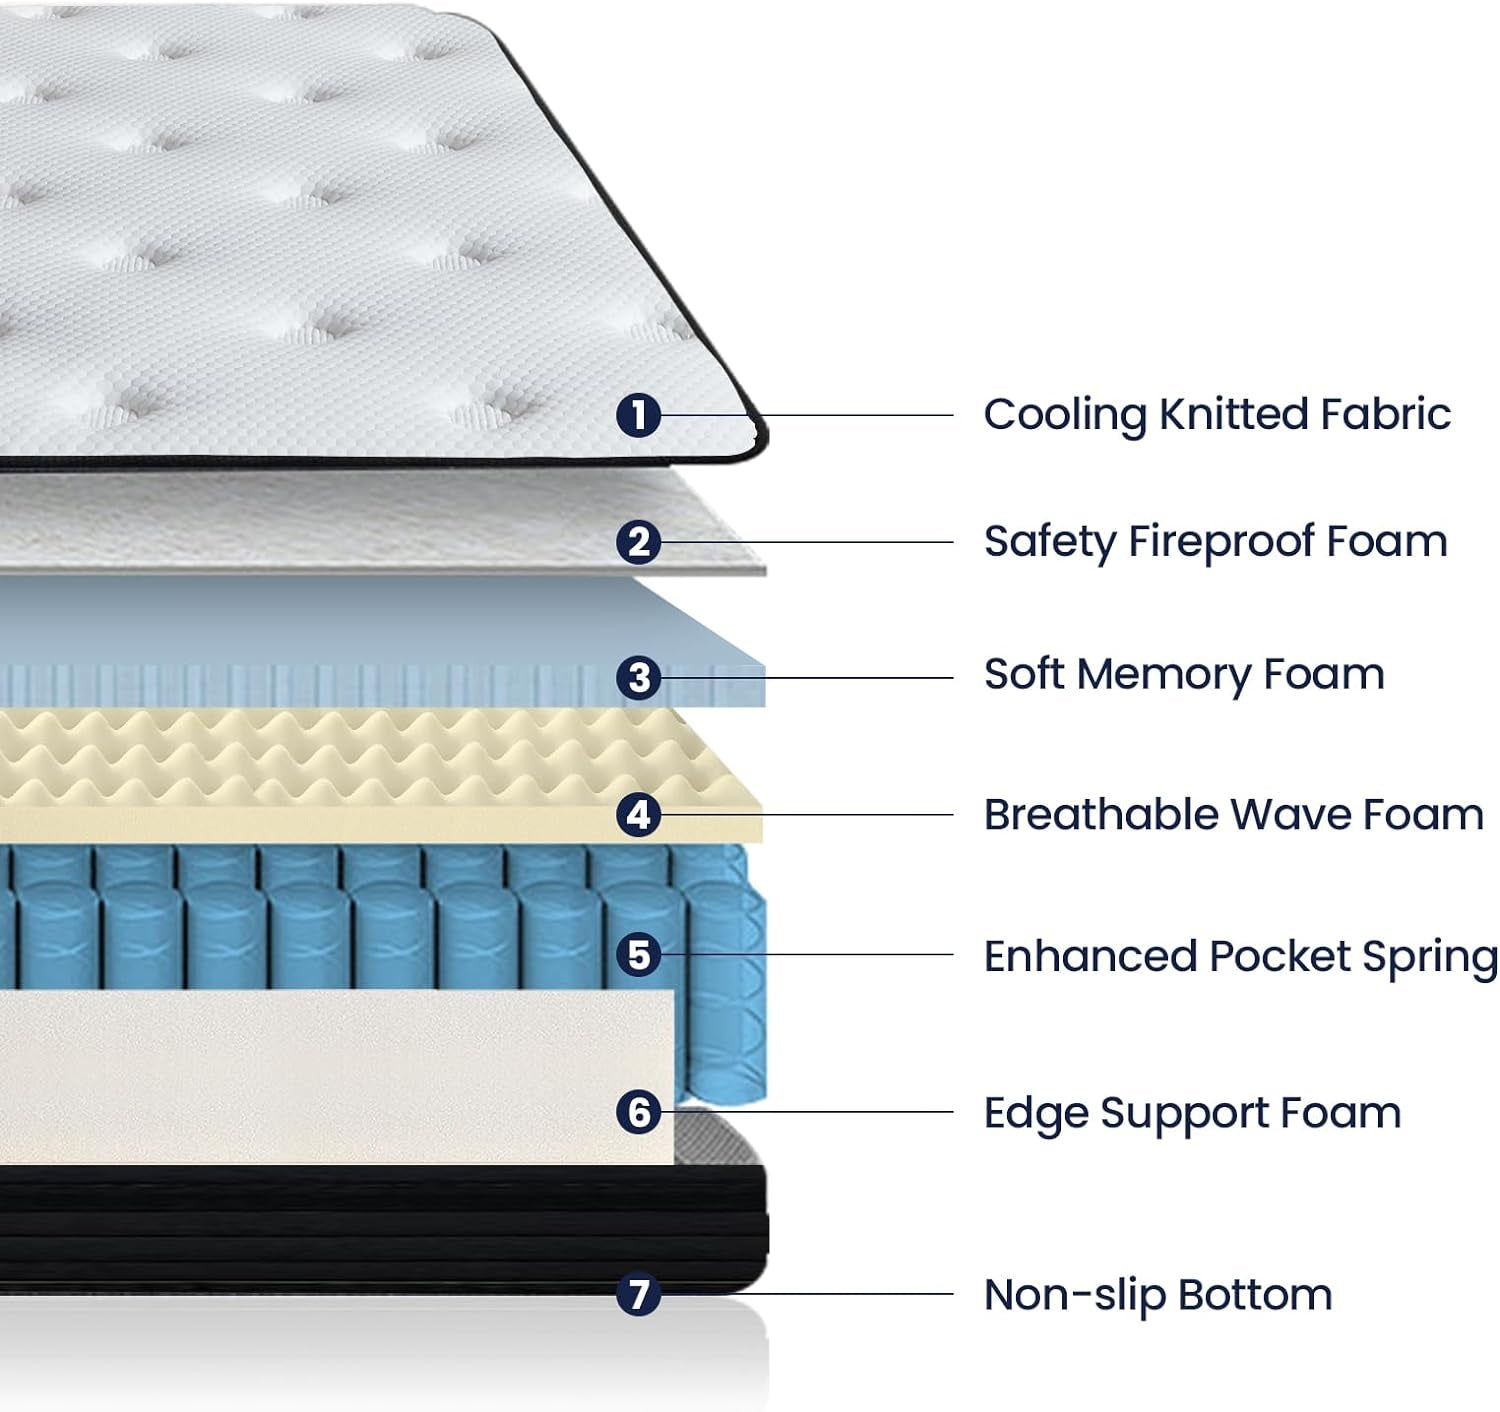 King Mattress, 12 Inch Memory Foam Hybrid Mattress King, Pocket Spring Mattress in a Box for Motion Isolation, Strong Edge Support, Pressure Relief, Plush Feel, Certipur-Us